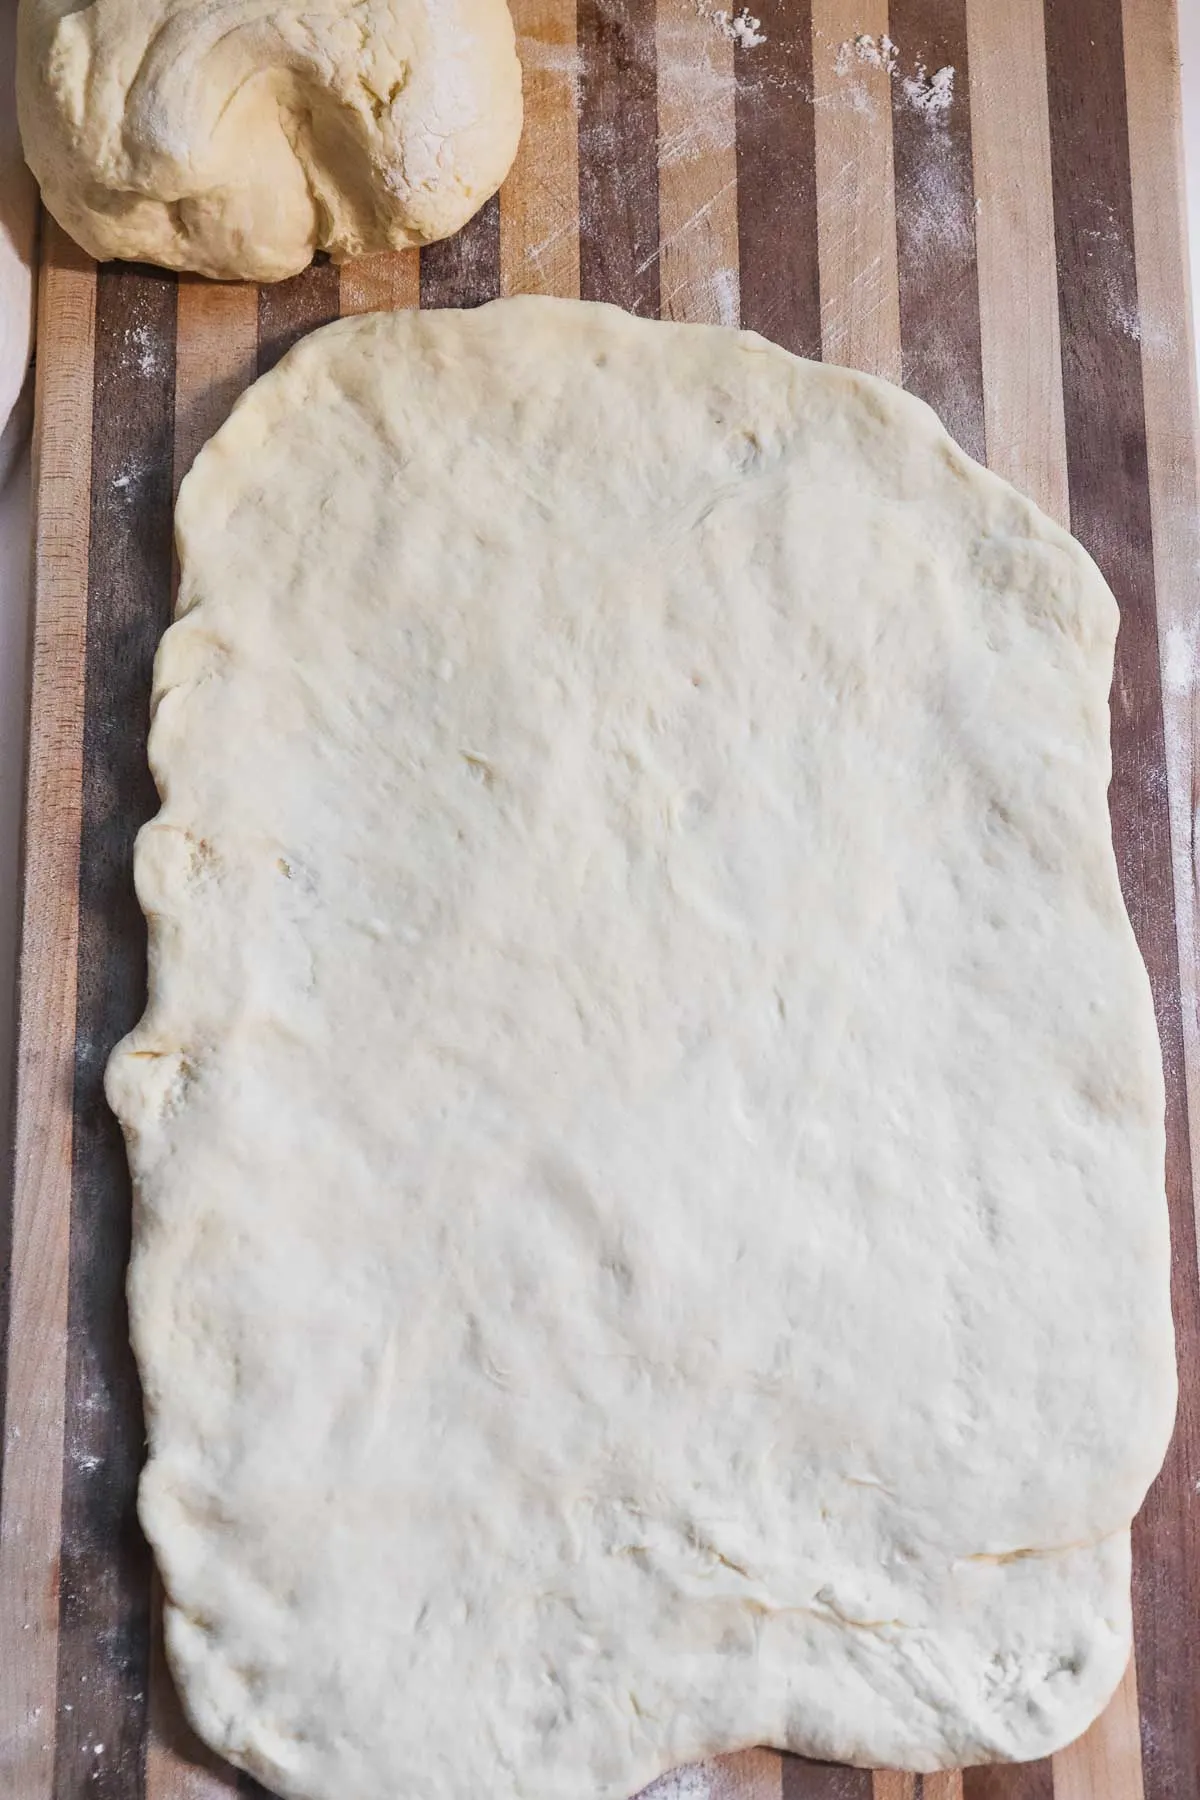 Rolled out pizza dough for pinwheels